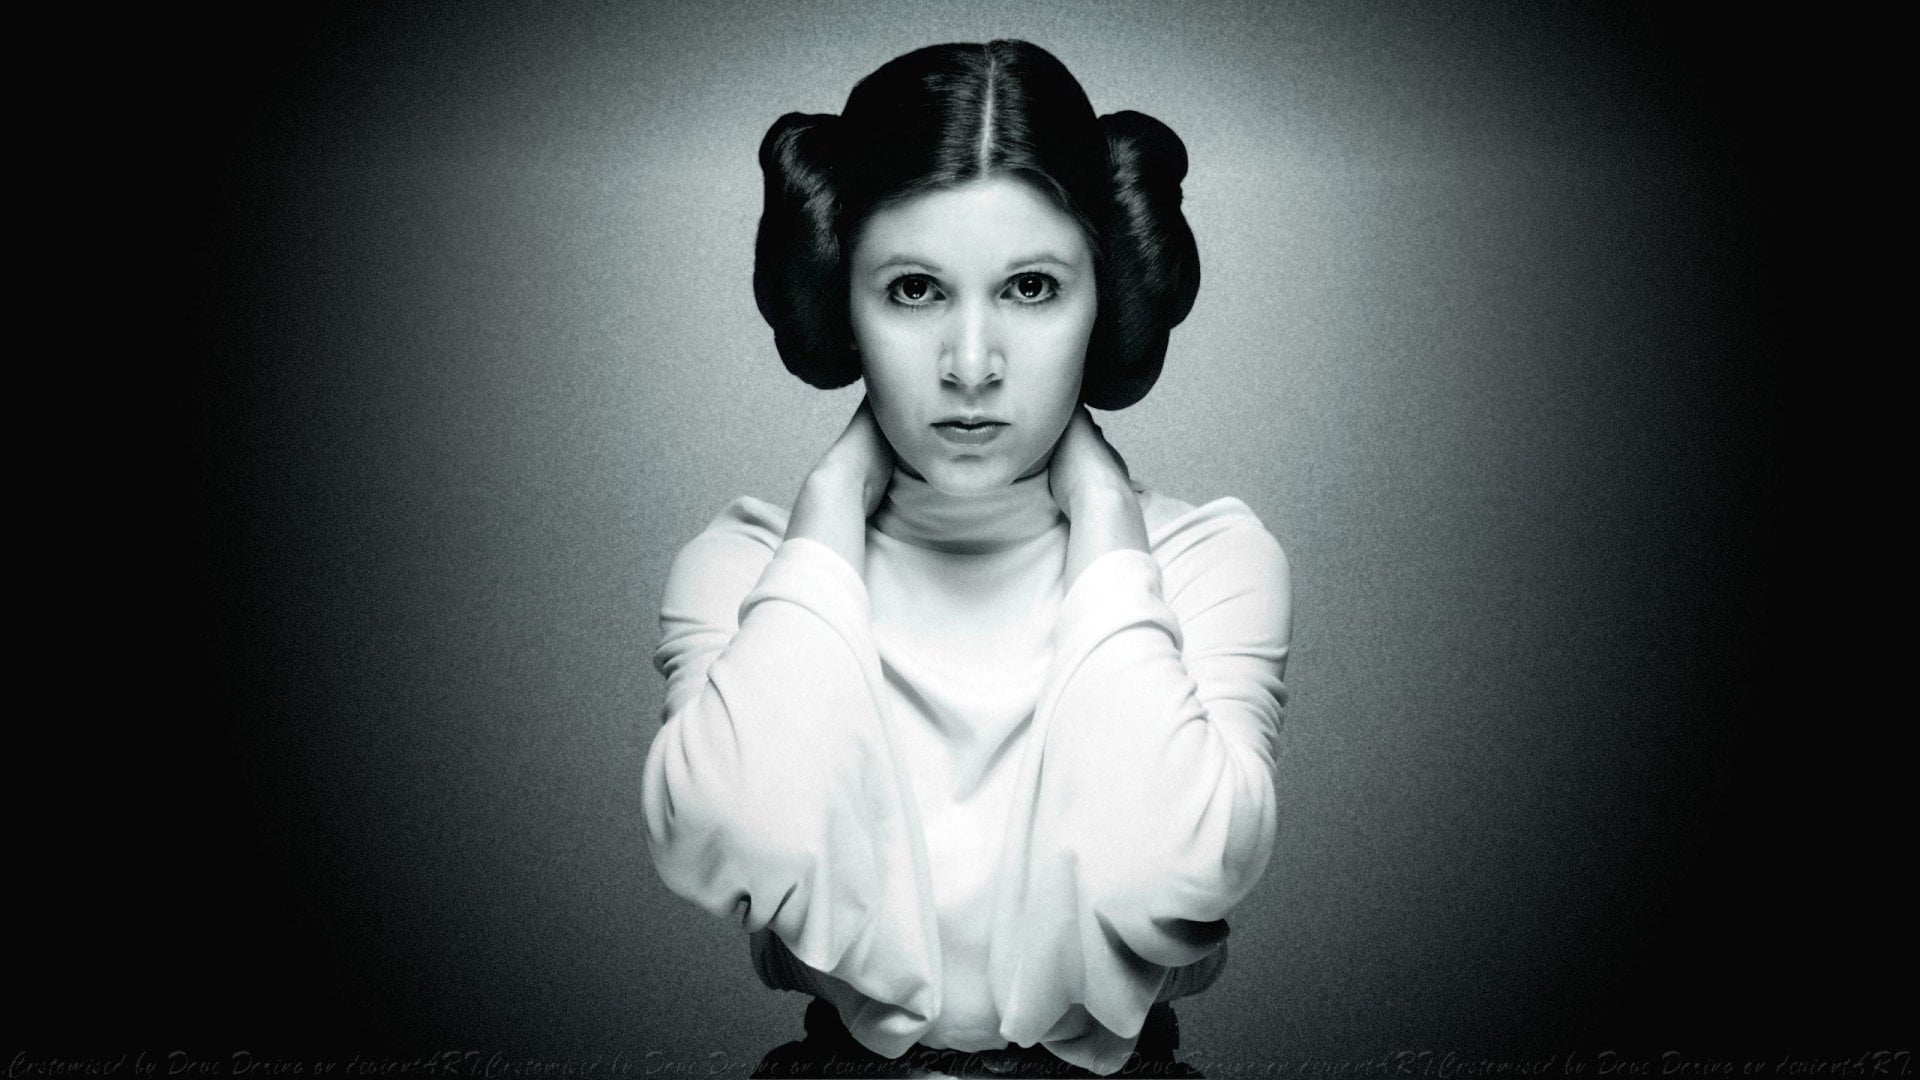 Star Wars, Carrie Fisher, Princess Leia, portrait, looking at camera